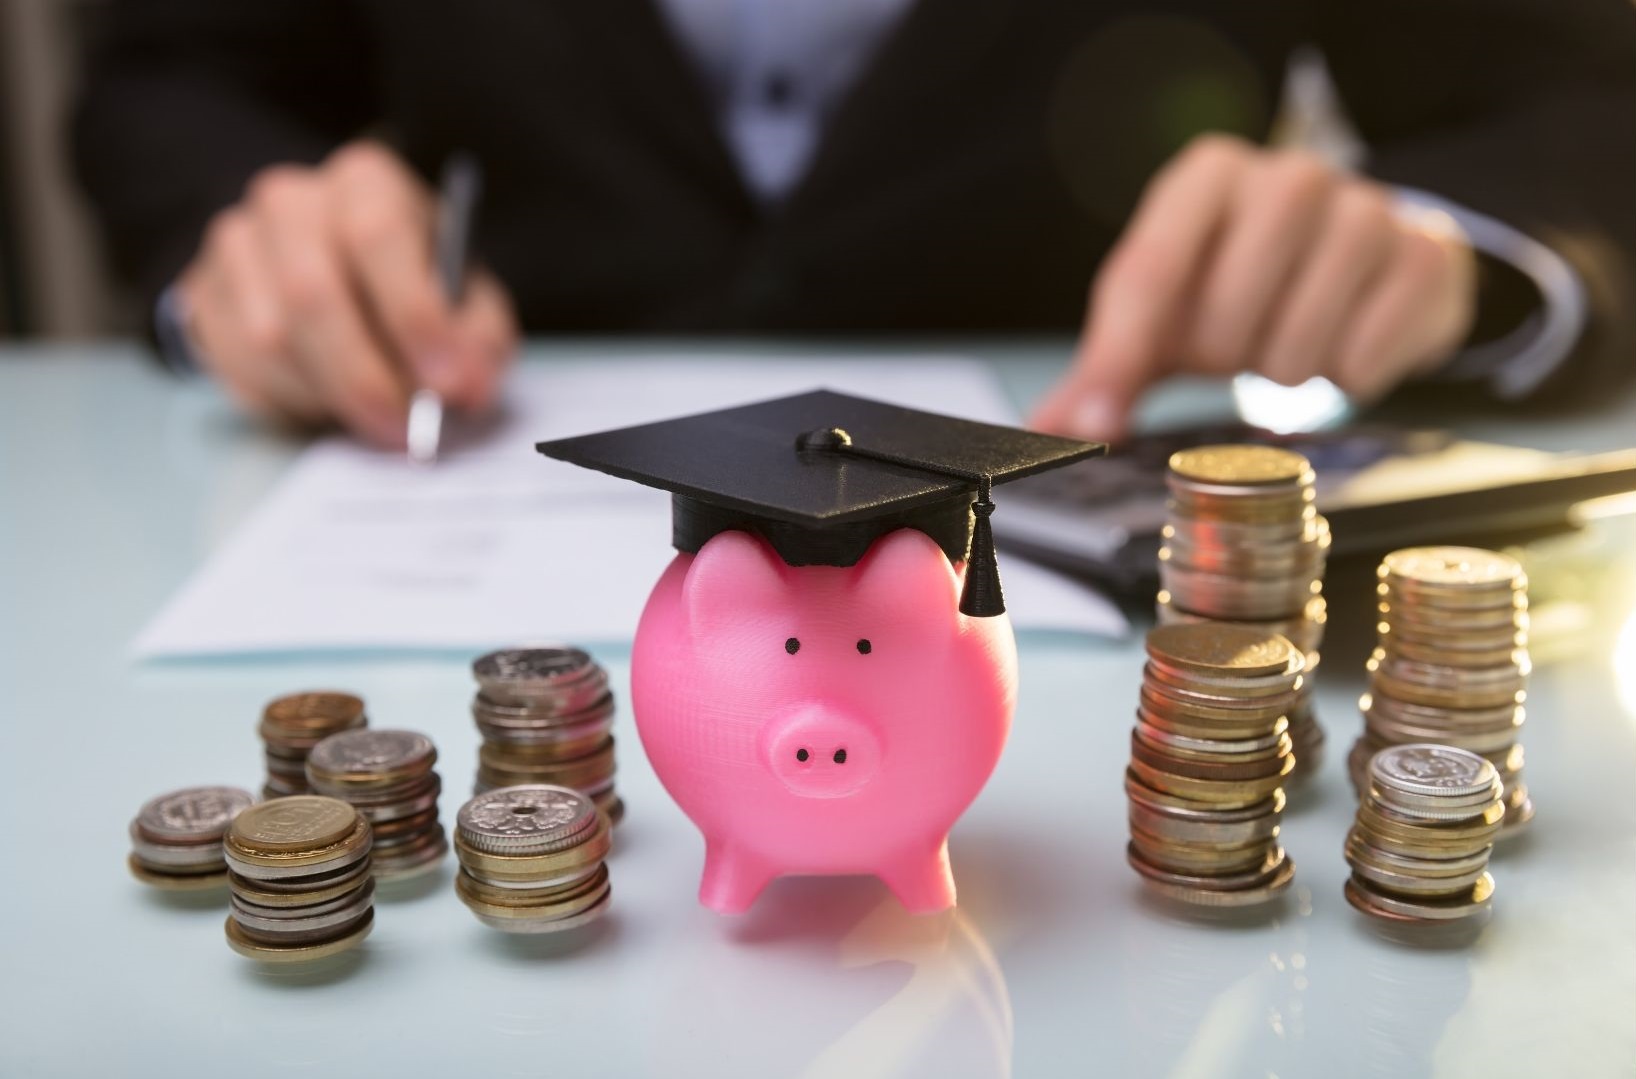 small piggy bank with a graduation cap on in the centre of the image. Money coins are stacked either side and in the background is someone studying